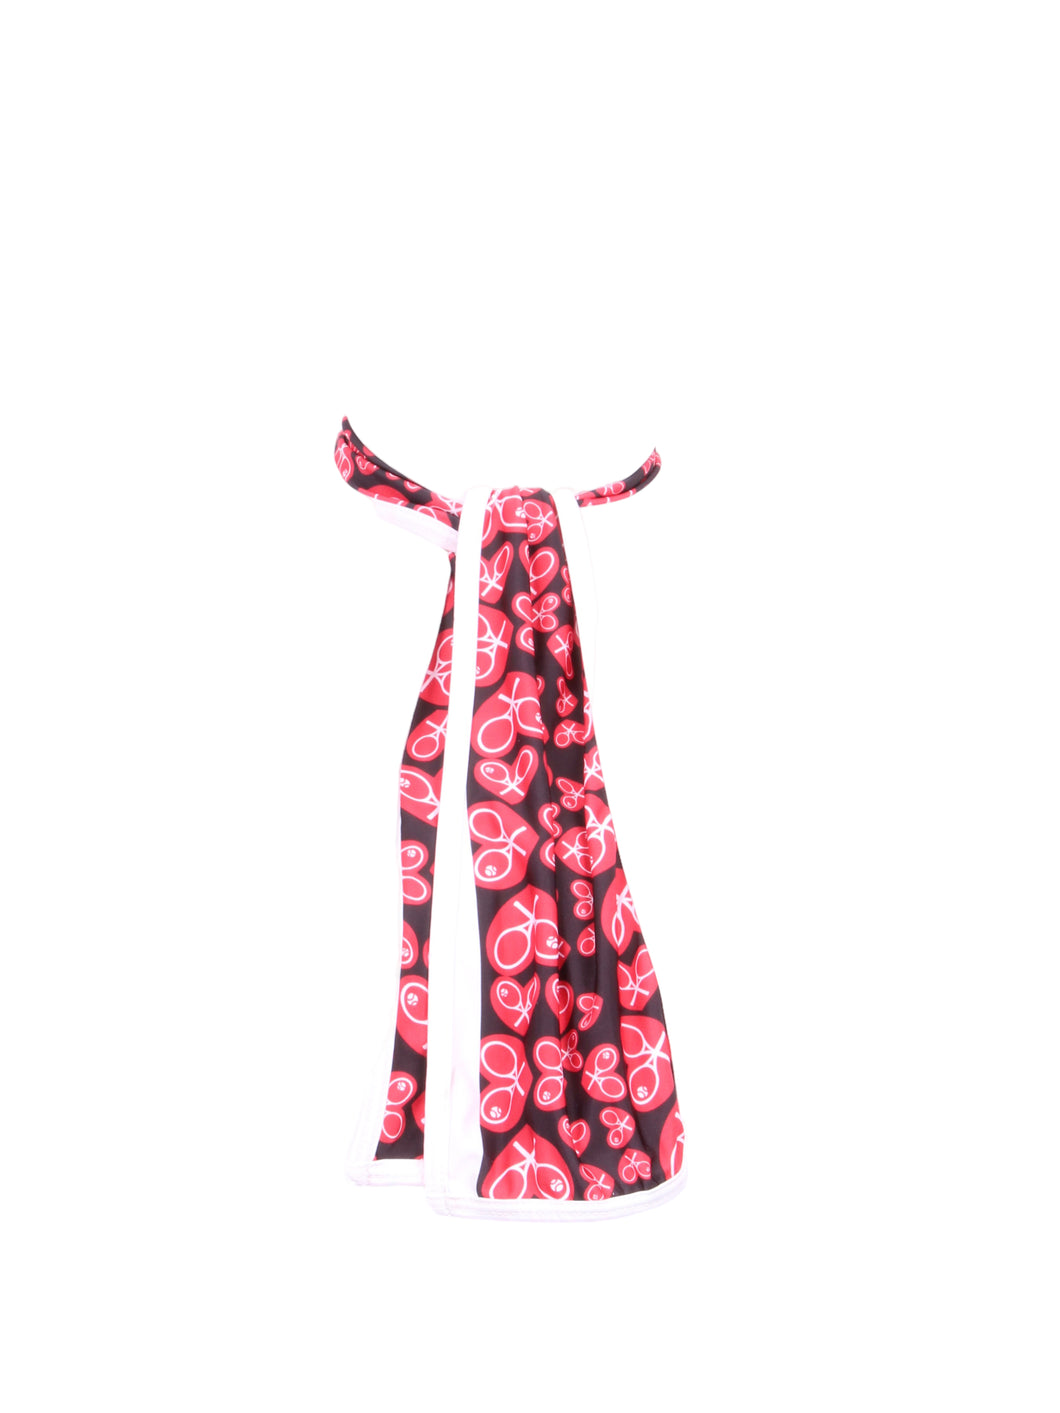 Soft, light and smooth and gorgeous!  This lightweight versatile scarf can be worn in a number of ways.  To protect the delicate décolleté from the sun, can be worn damp for a cooling effect, or to simply add a pop of Color and pizazz to any outfit!  Comes in many different Chloe’s and Love Love prints.